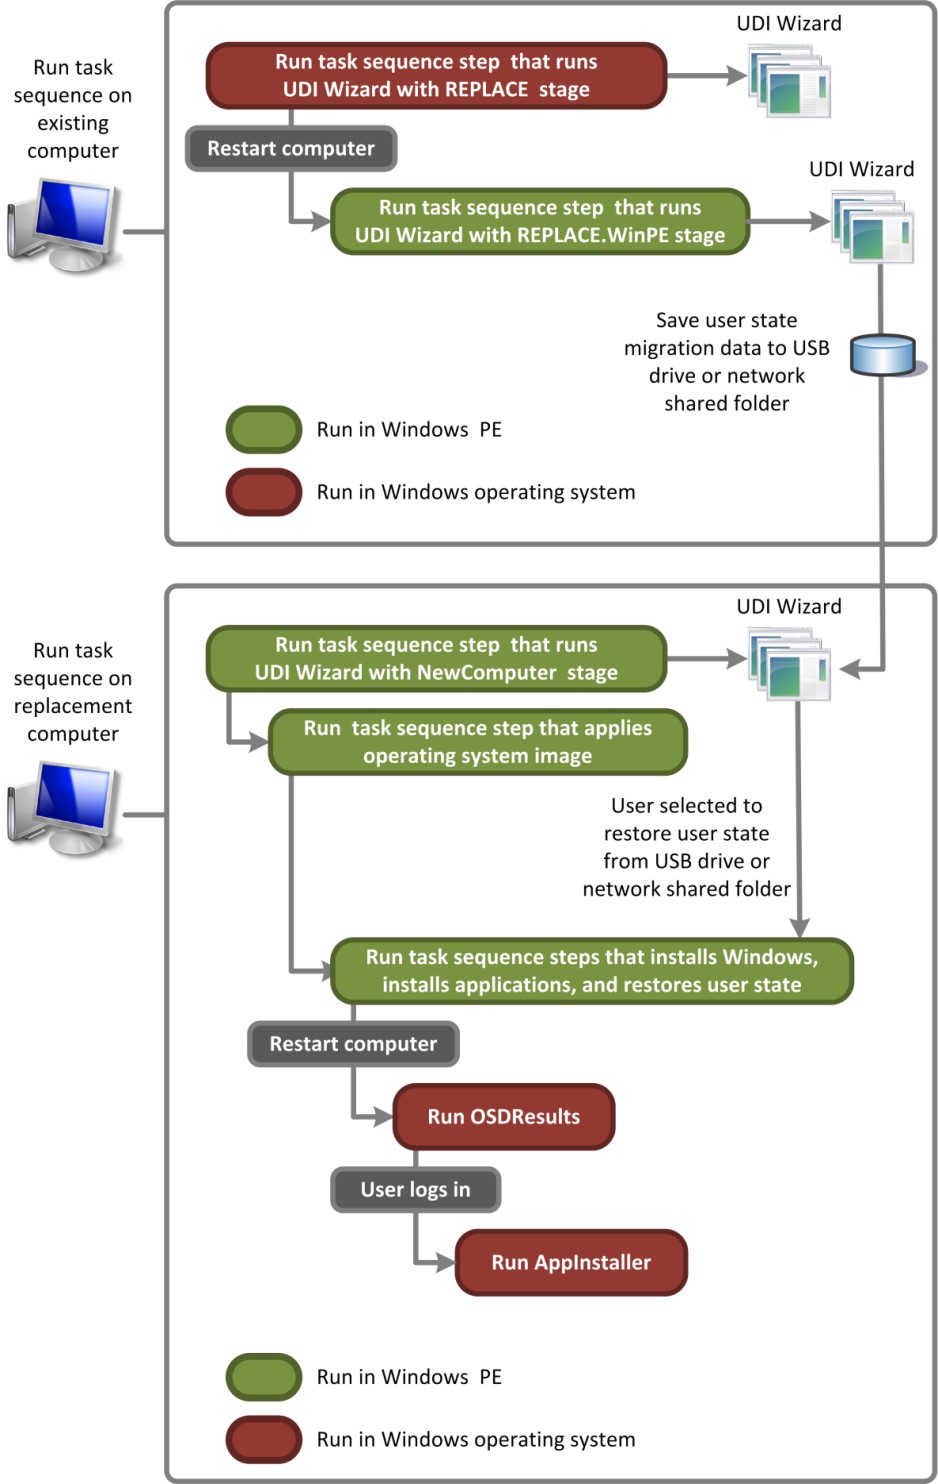 Figure 5. Process flow for UDI performing the Replace Computer deployment scenario